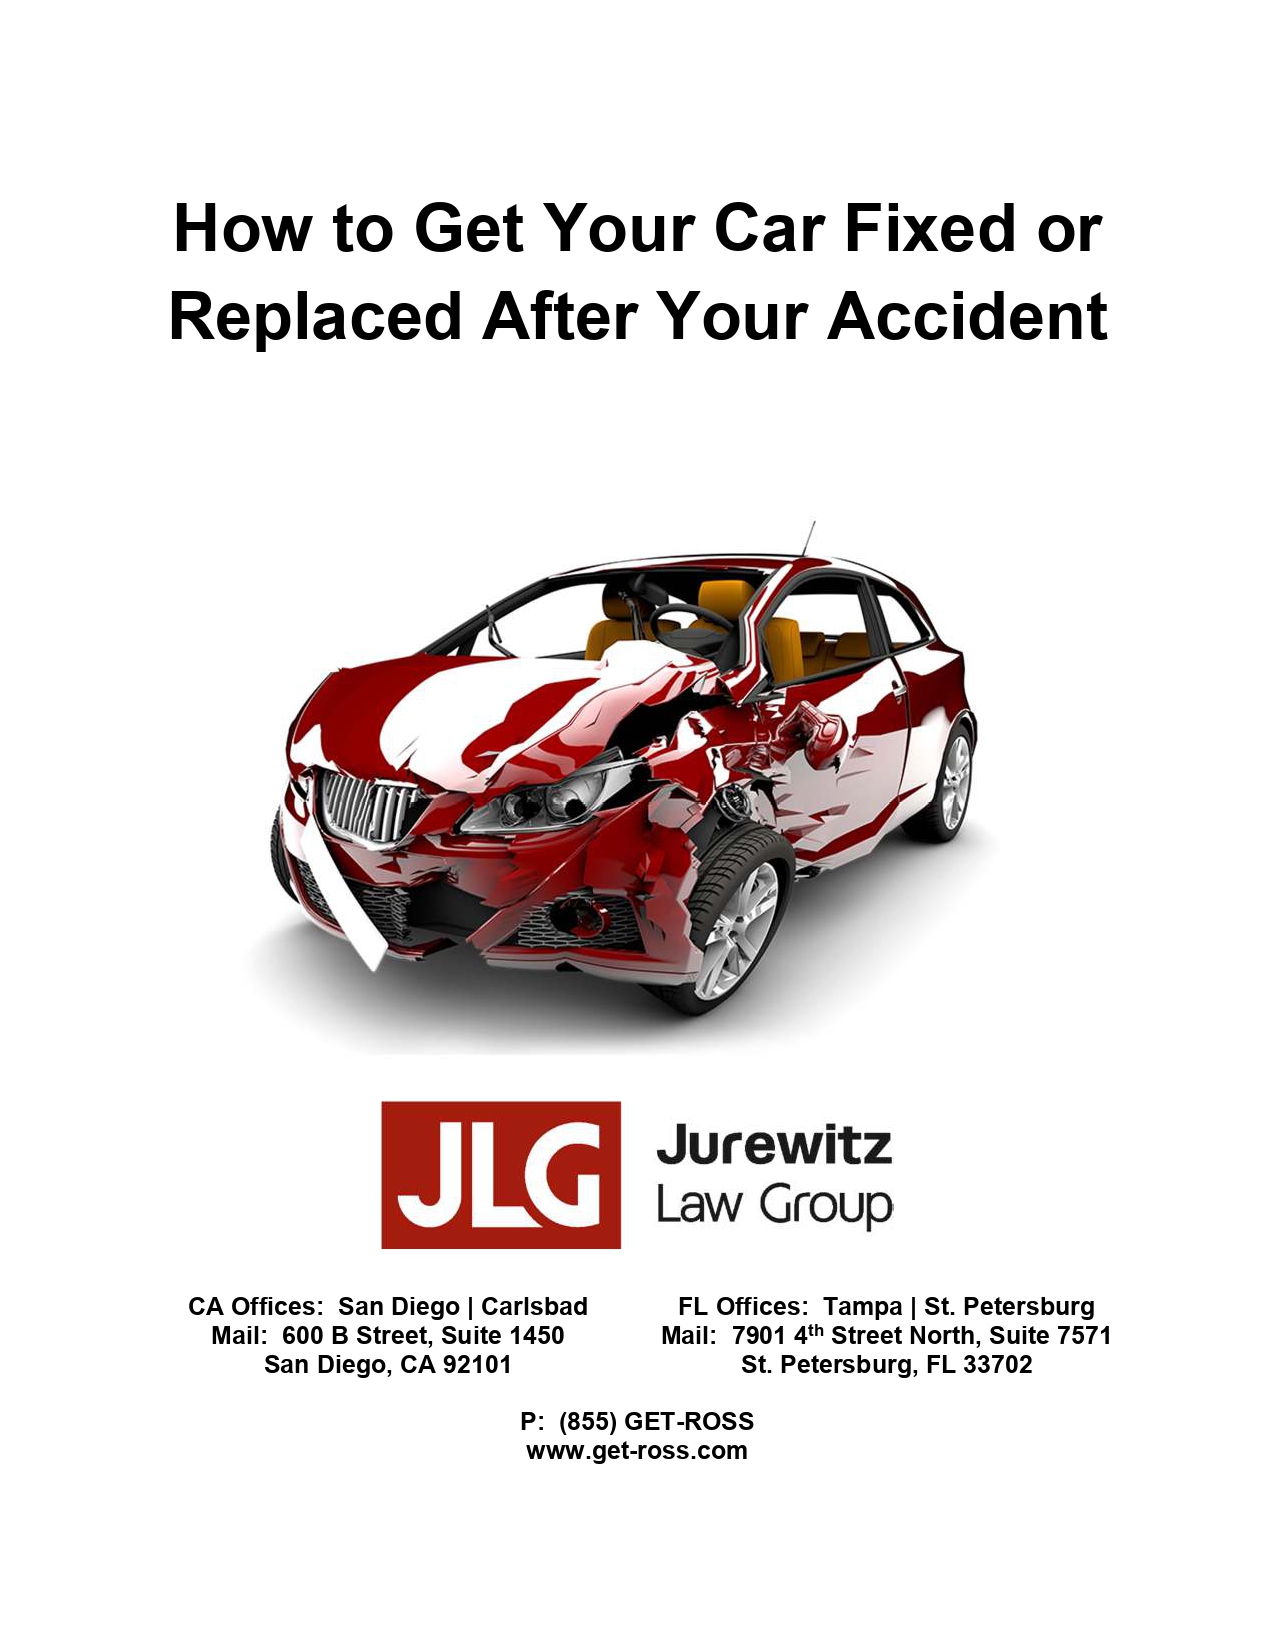 How-to-Get-Your-Car-Fixed-or-Replaced-After-Your-Accident_page